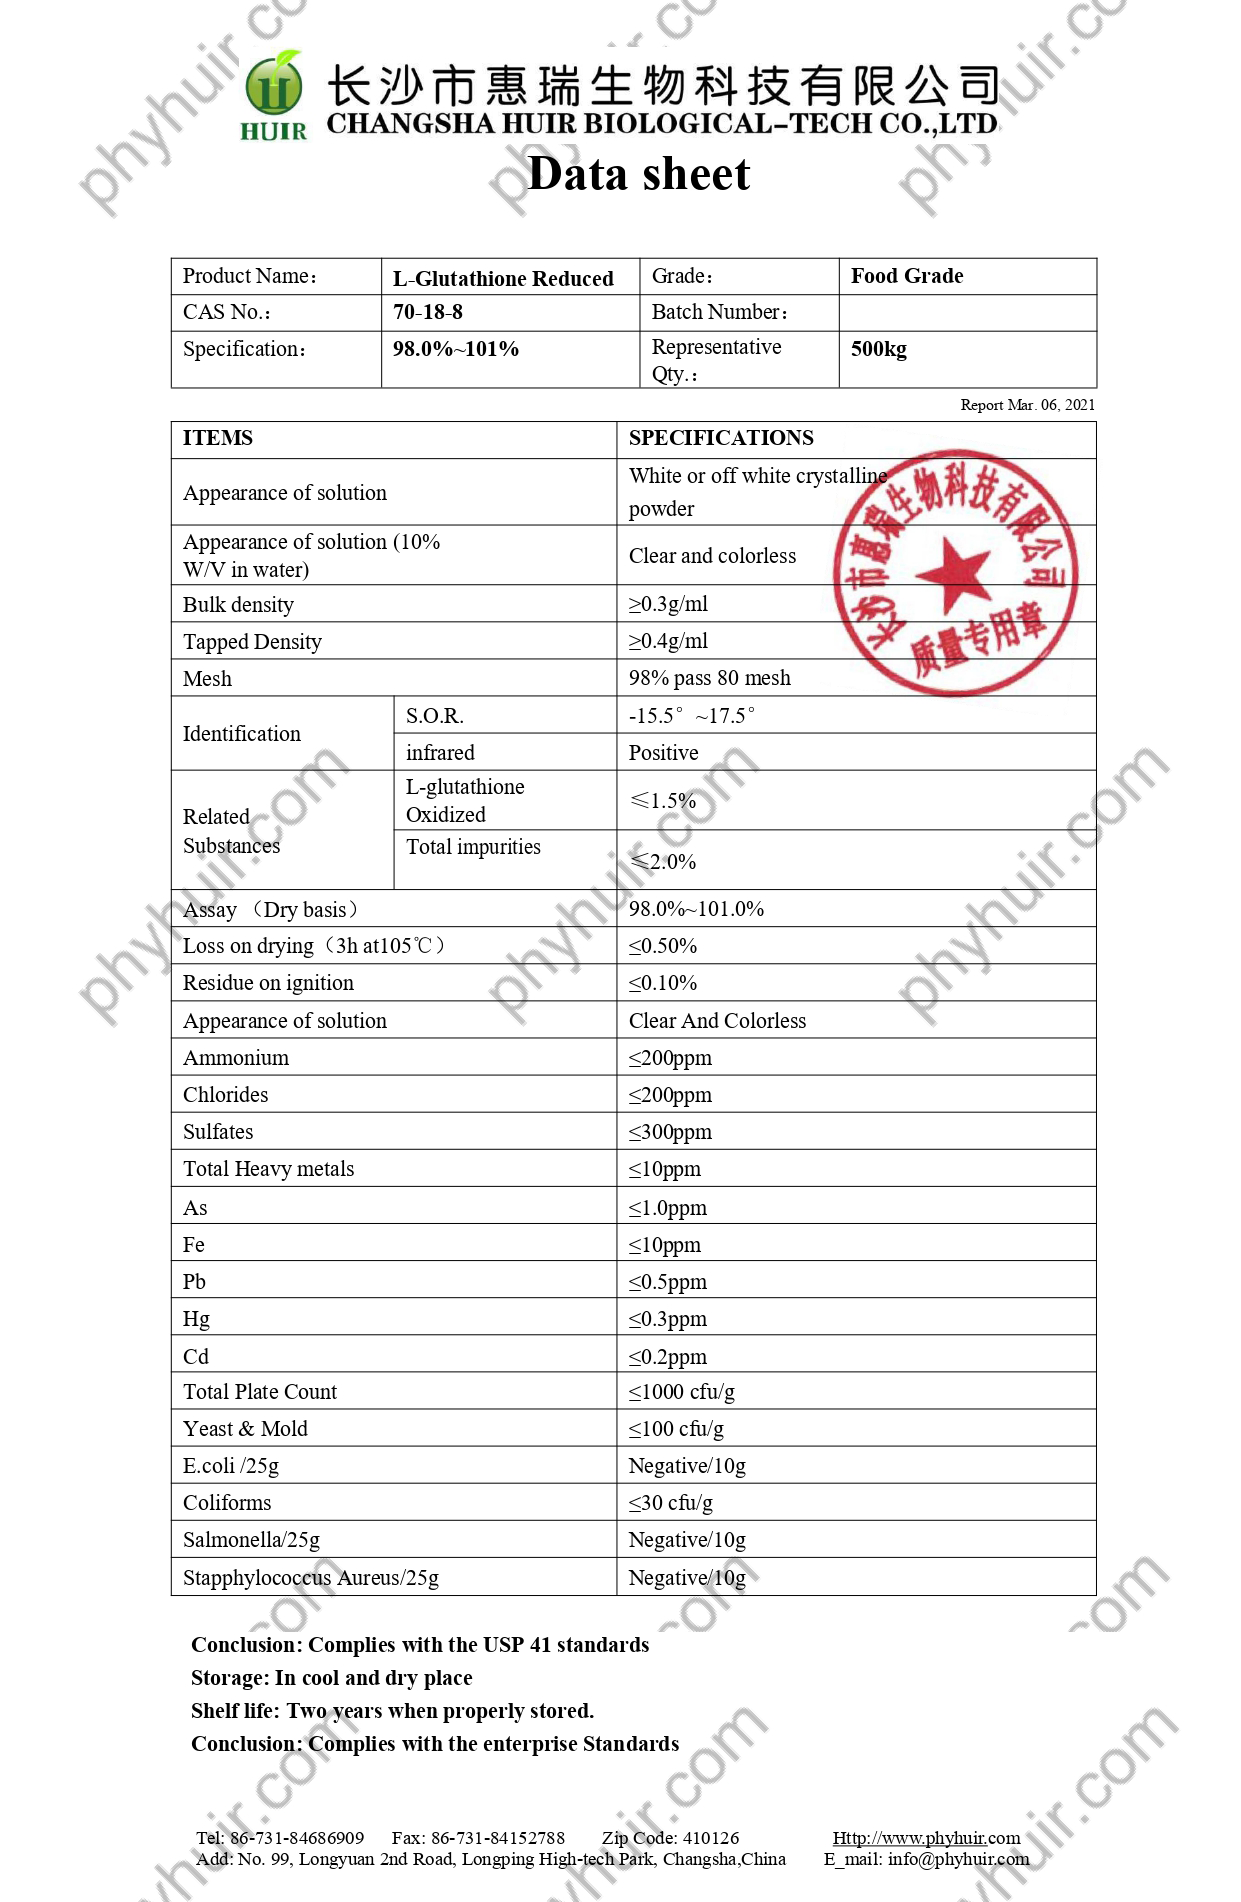 Data sheet of L-Glutathione reduced_watermark_page-0001.png